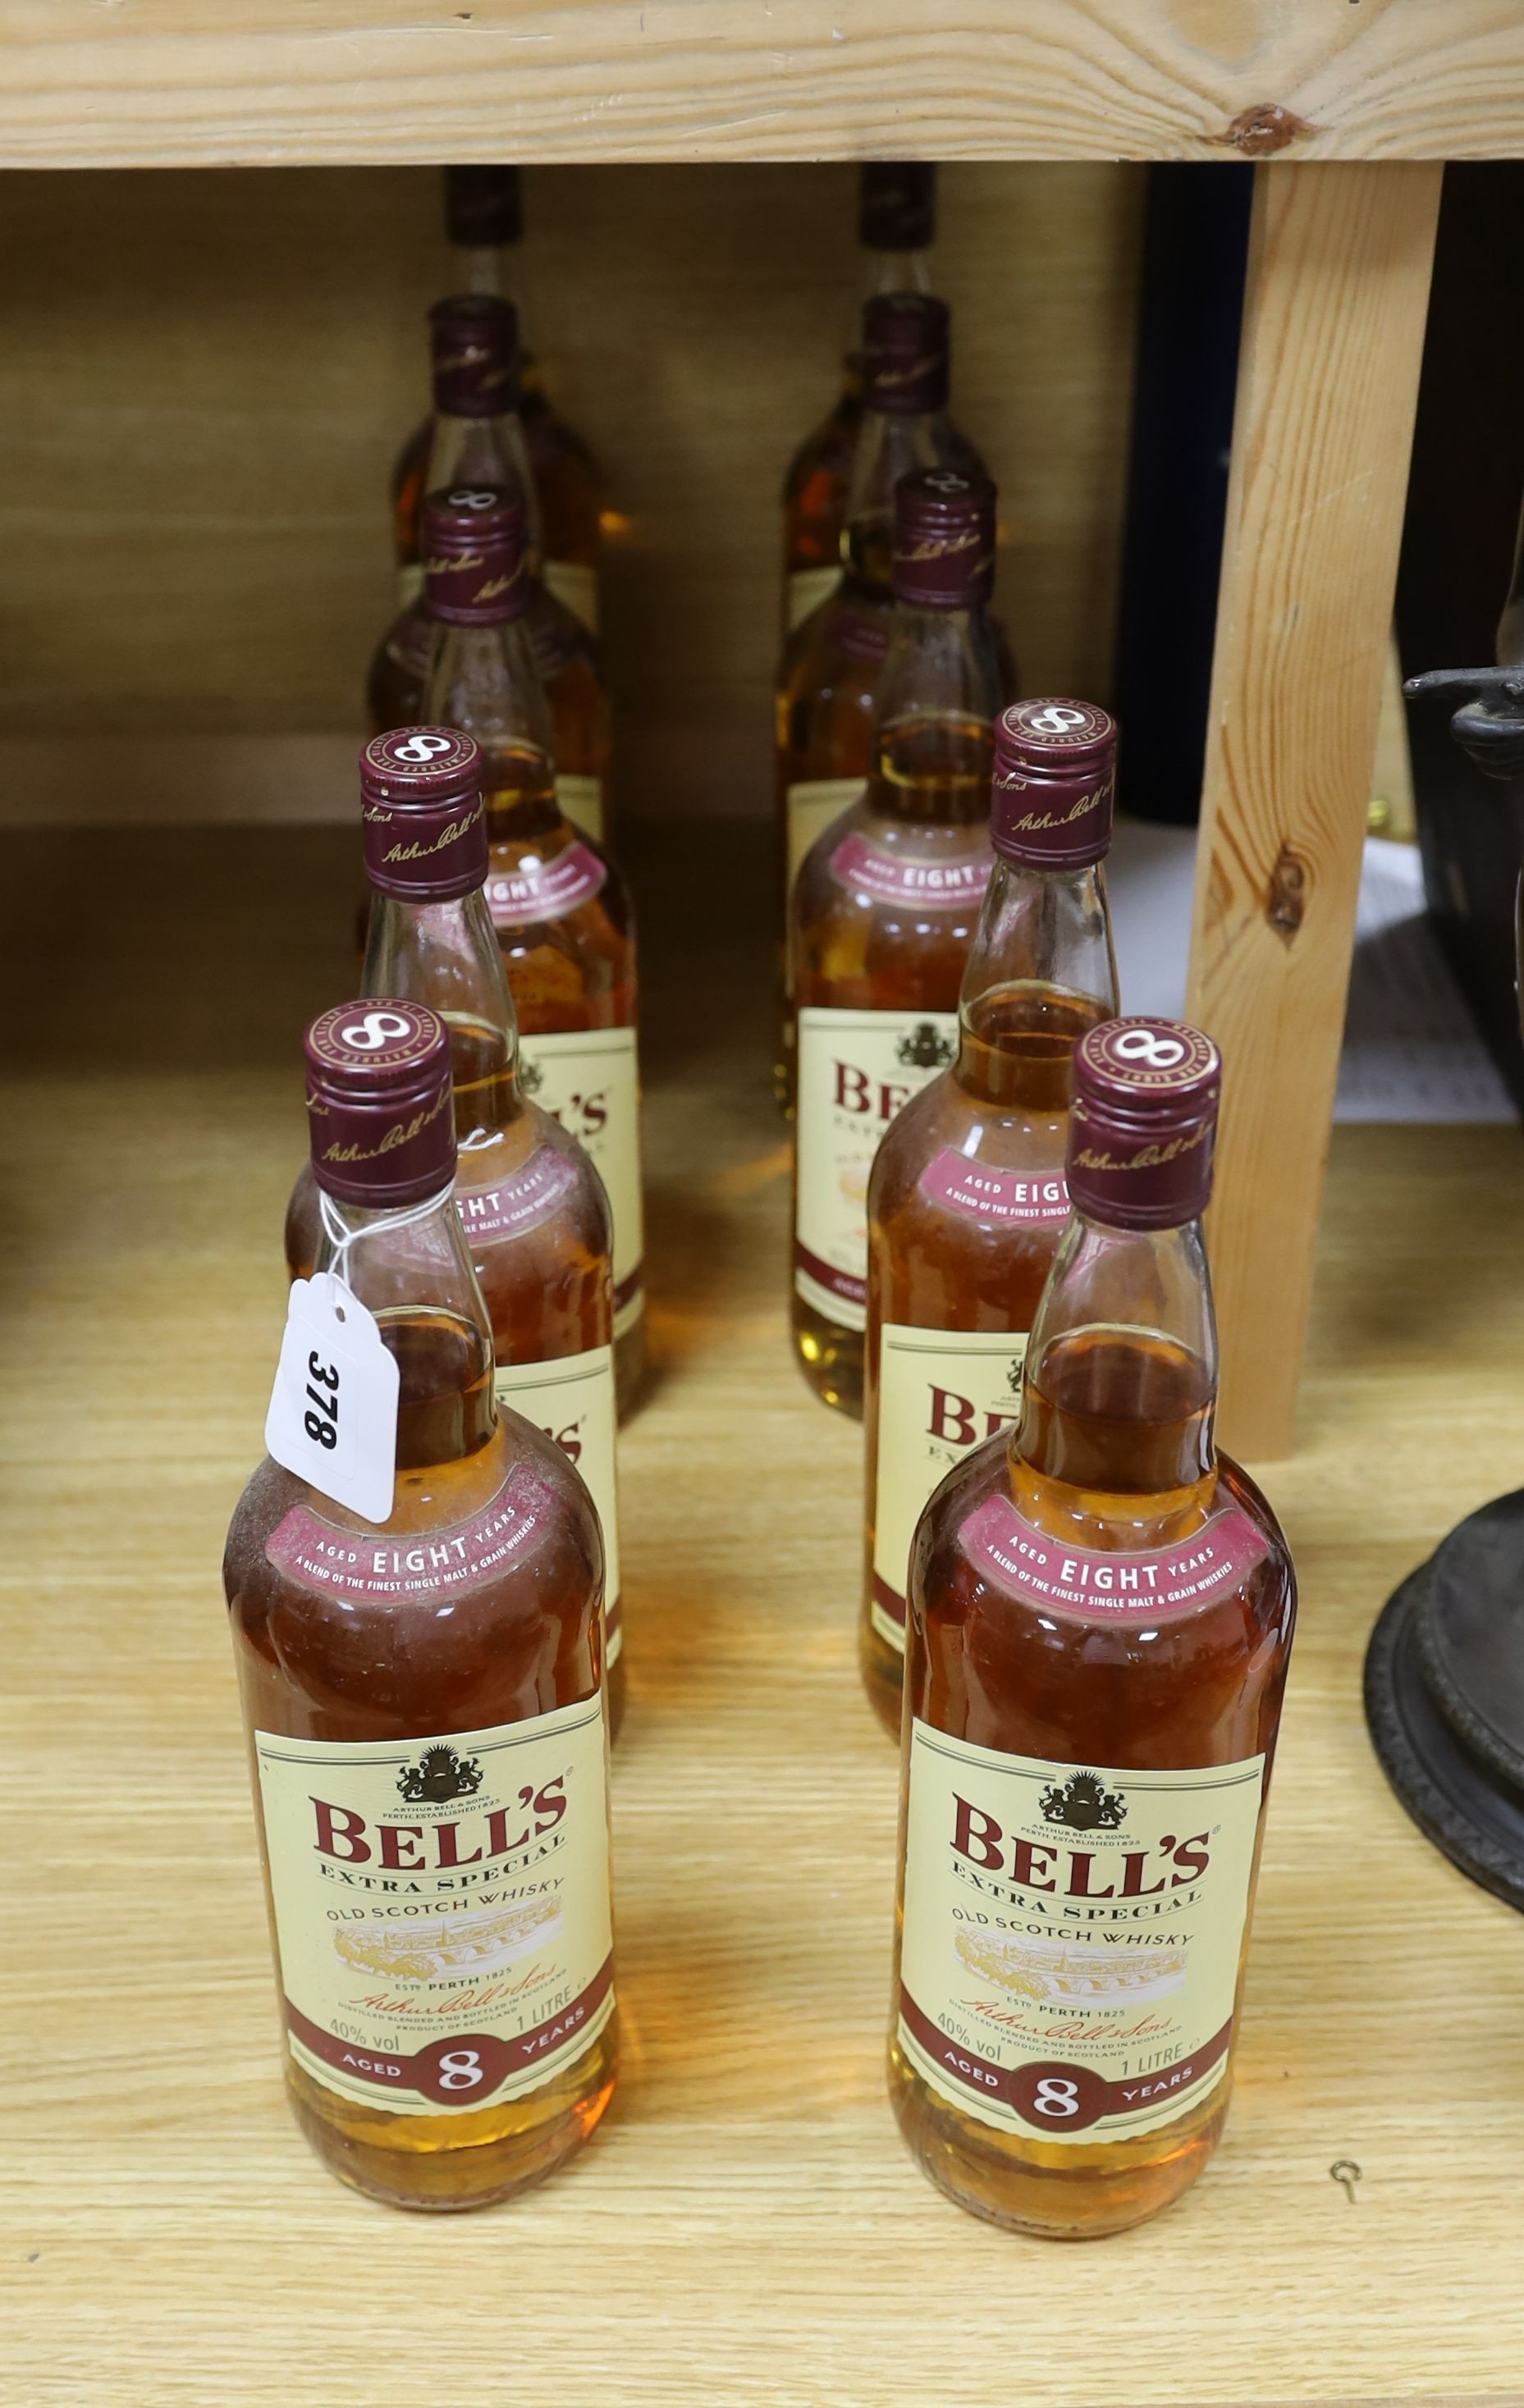 Ten litre bottles of Bells extra special scotch whisky, aged 8 years